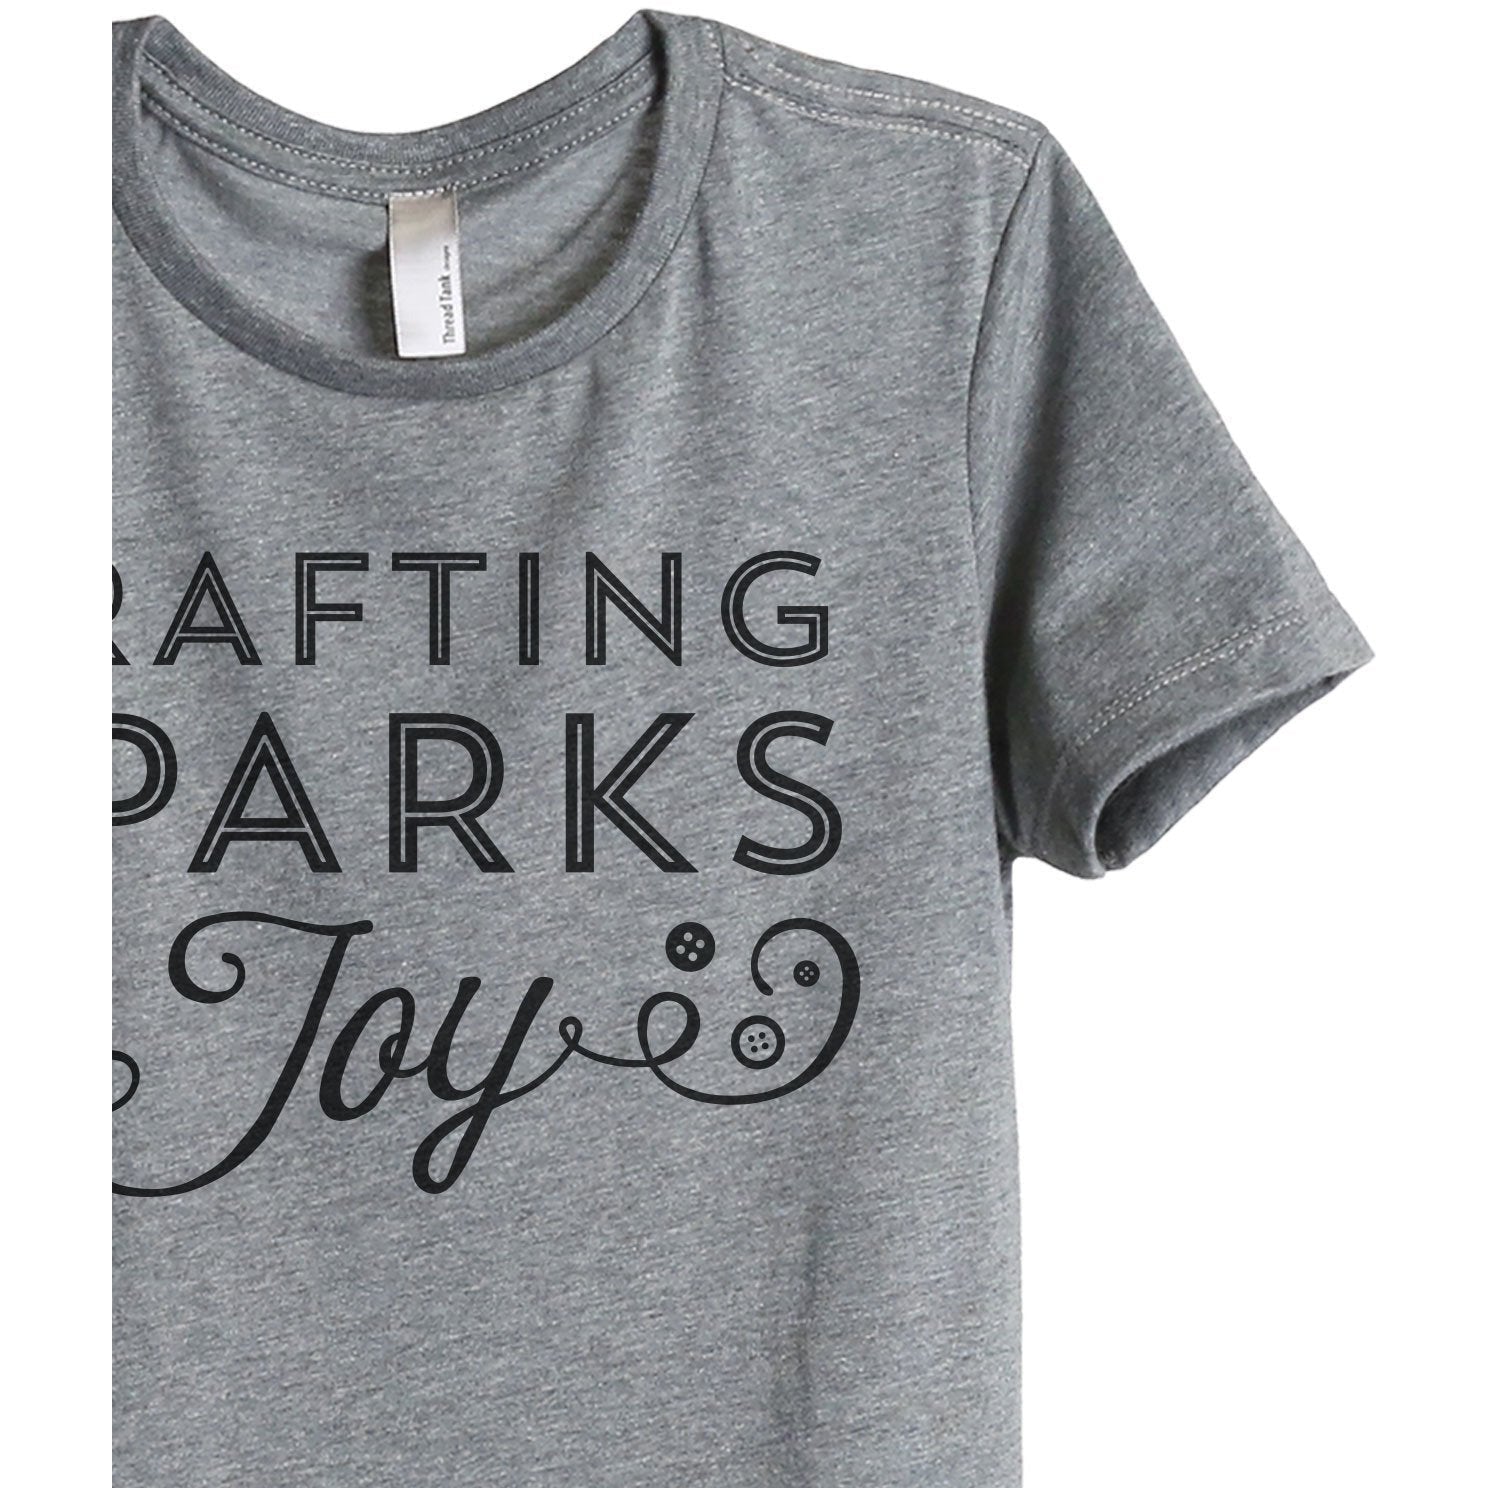 Crafting Sparks Joy Women's Relaxed Crewneck T-Shirt Top Tee Heather Grey